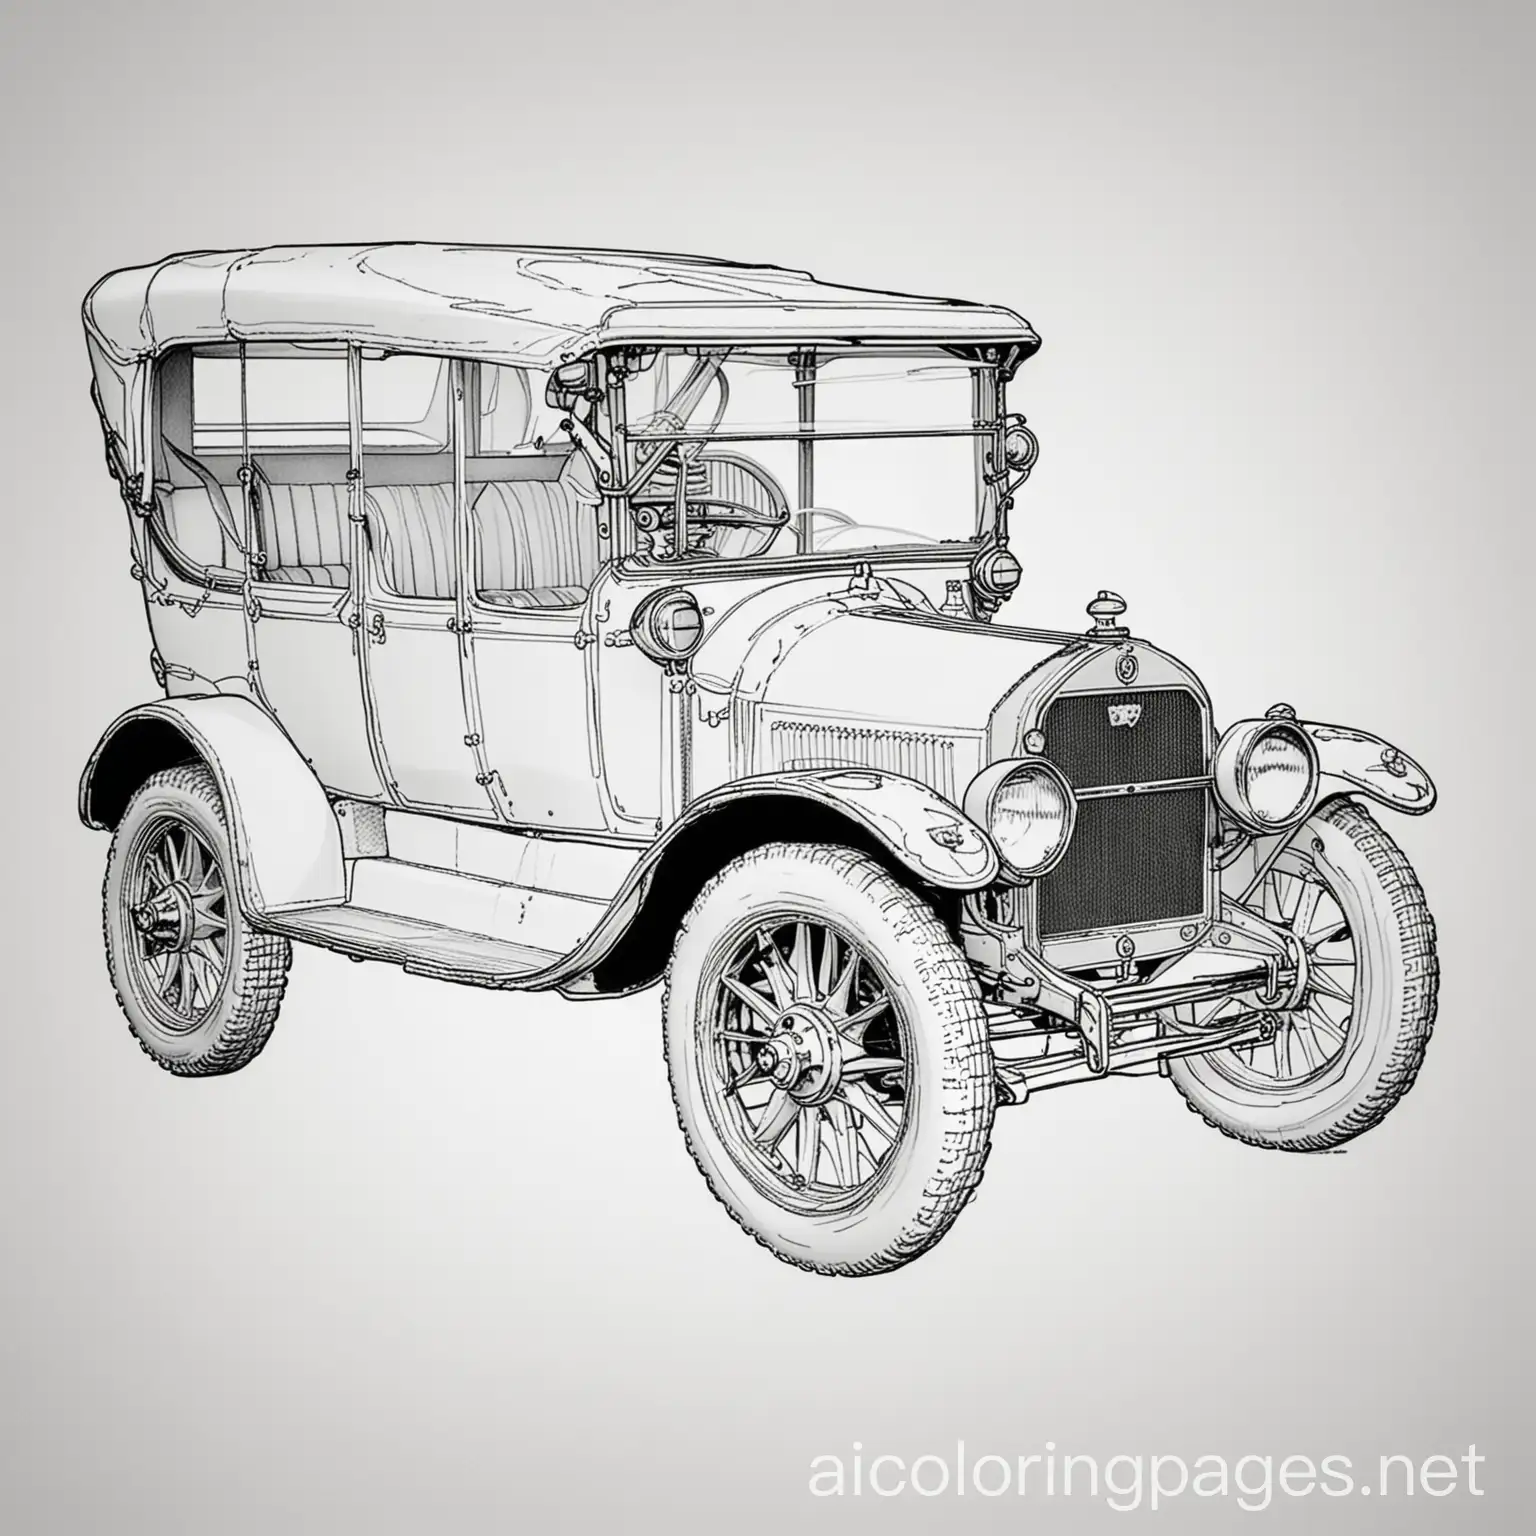  Dodge Model 30-35 from 1914, also known as "old Betsy" coloring page, Coloring Page, black and white, line art, white background, Simplicity, Ample White Space. The background of the coloring page is plain white to make it easy for young children to color within the lines. The outlines of all the subjects are easy to distinguish, making it simple for kids to color without too much difficulty. (The input does not seem to be in another language, so I'm repeating the input as per the process.)